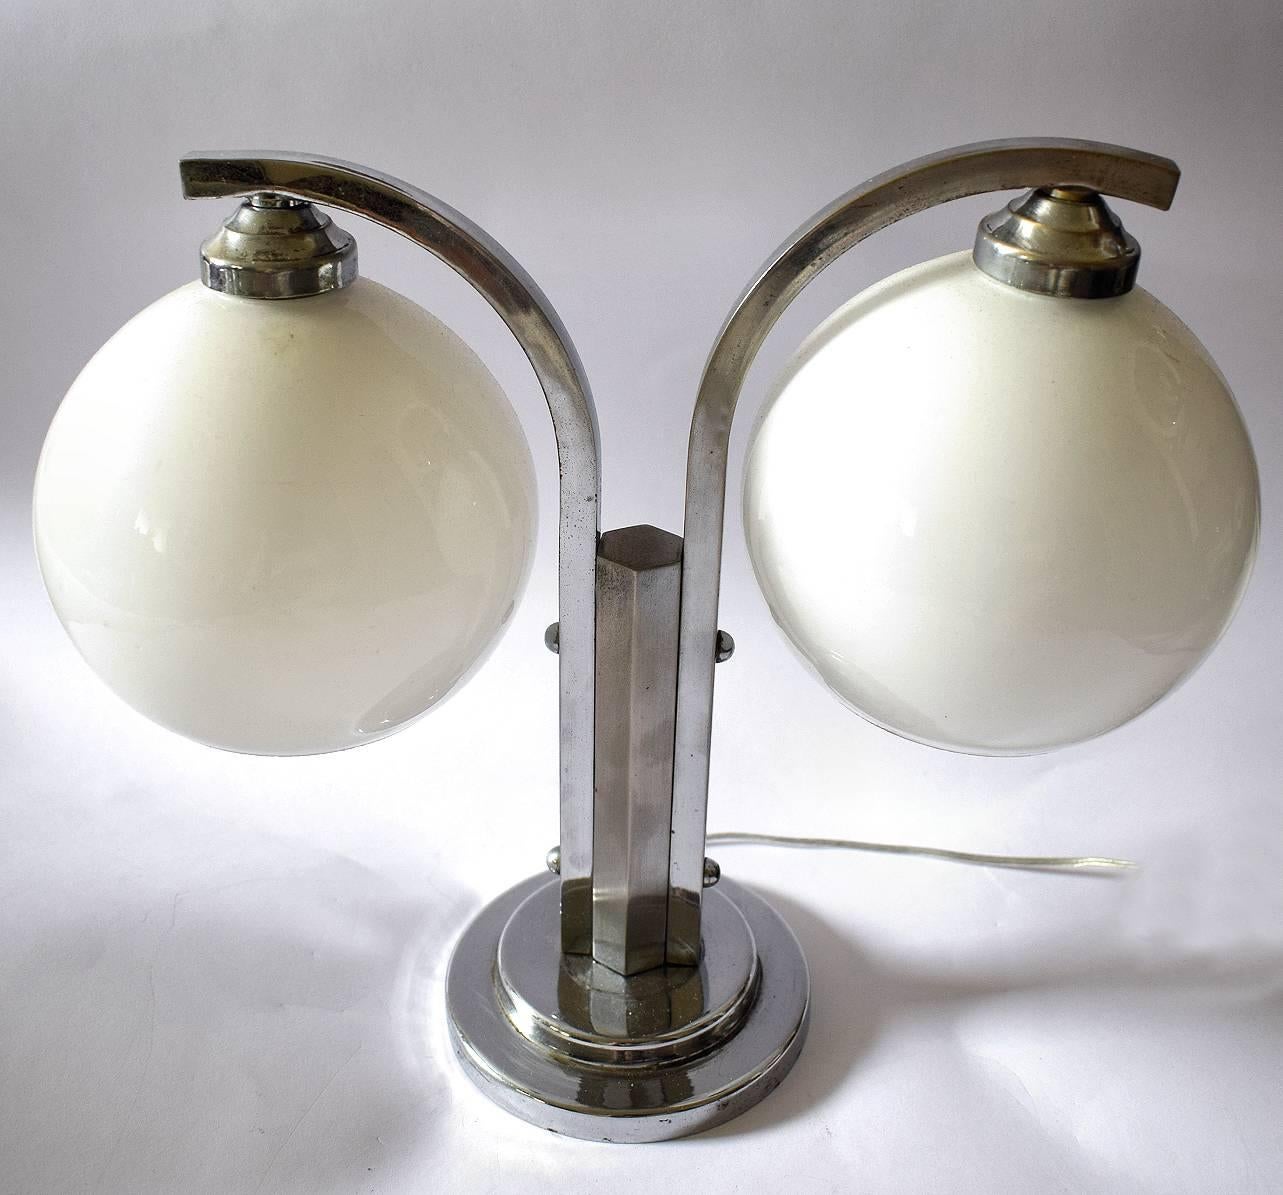 Art Deco Modernist Double Shade Table Lamp In Good Condition For Sale In Devon, England